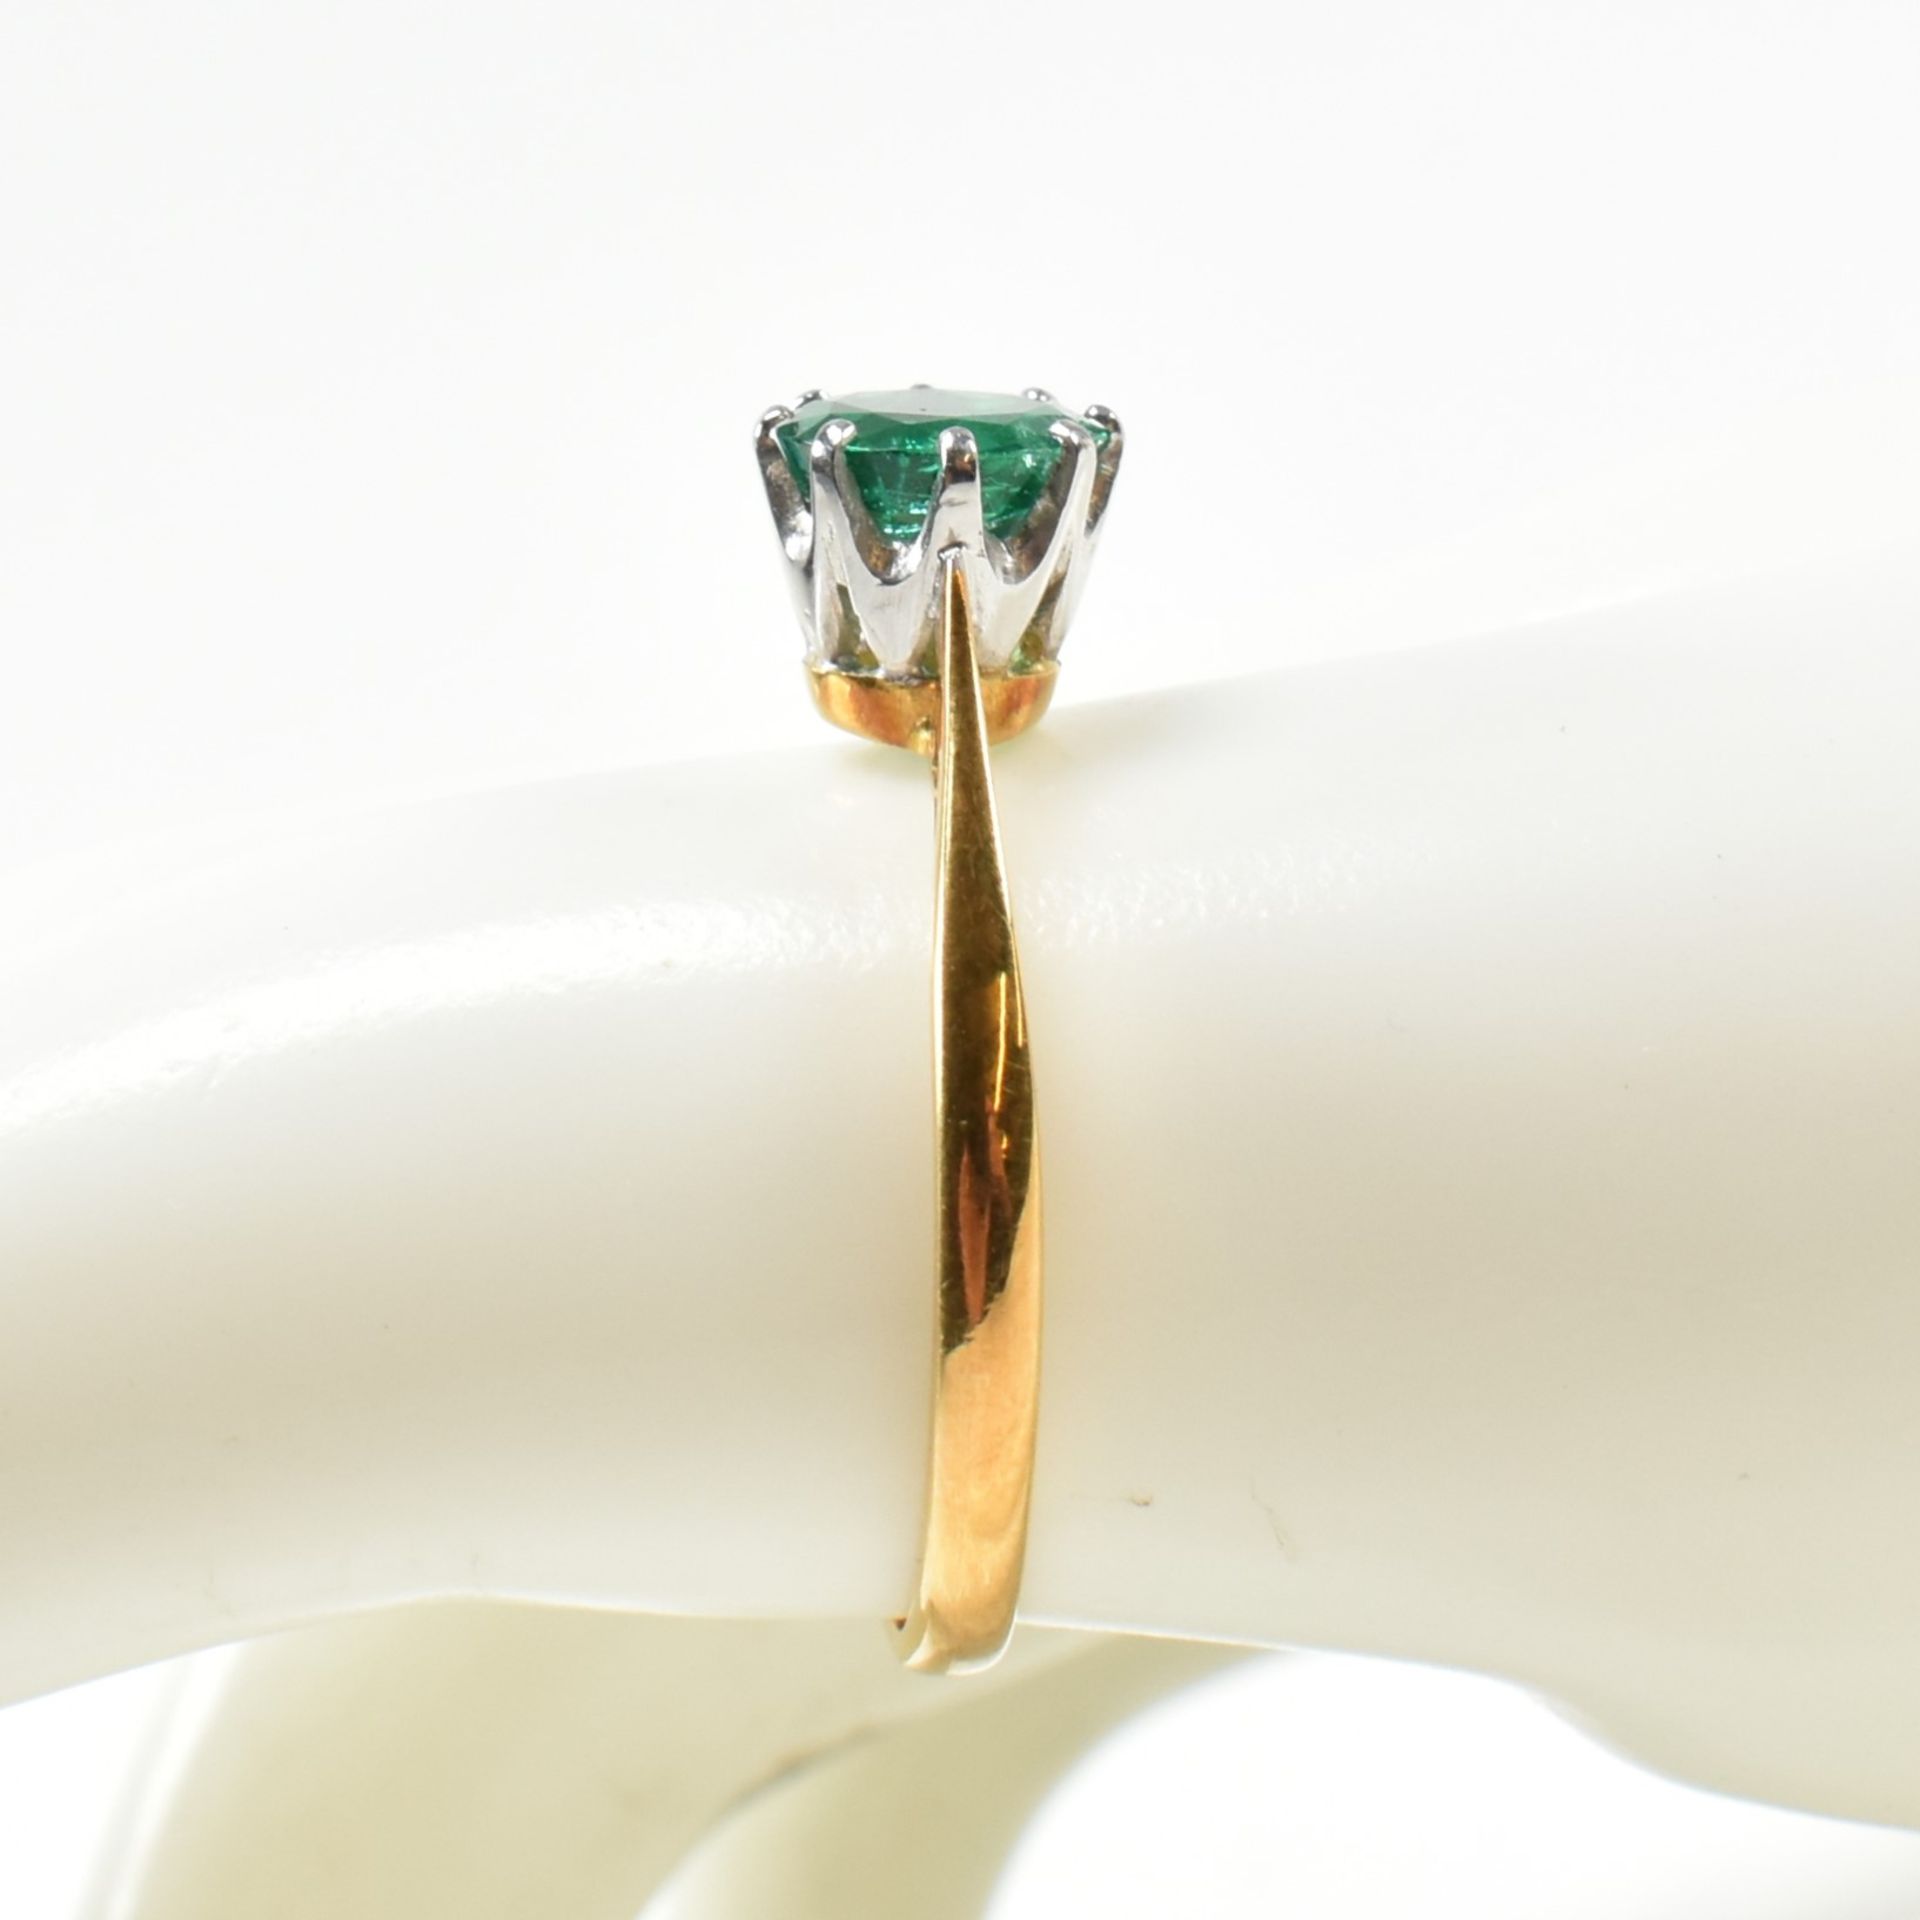 HALLMARKED 18CT GOLD & EMERALD SOLITAIRE RING - Image 10 of 10